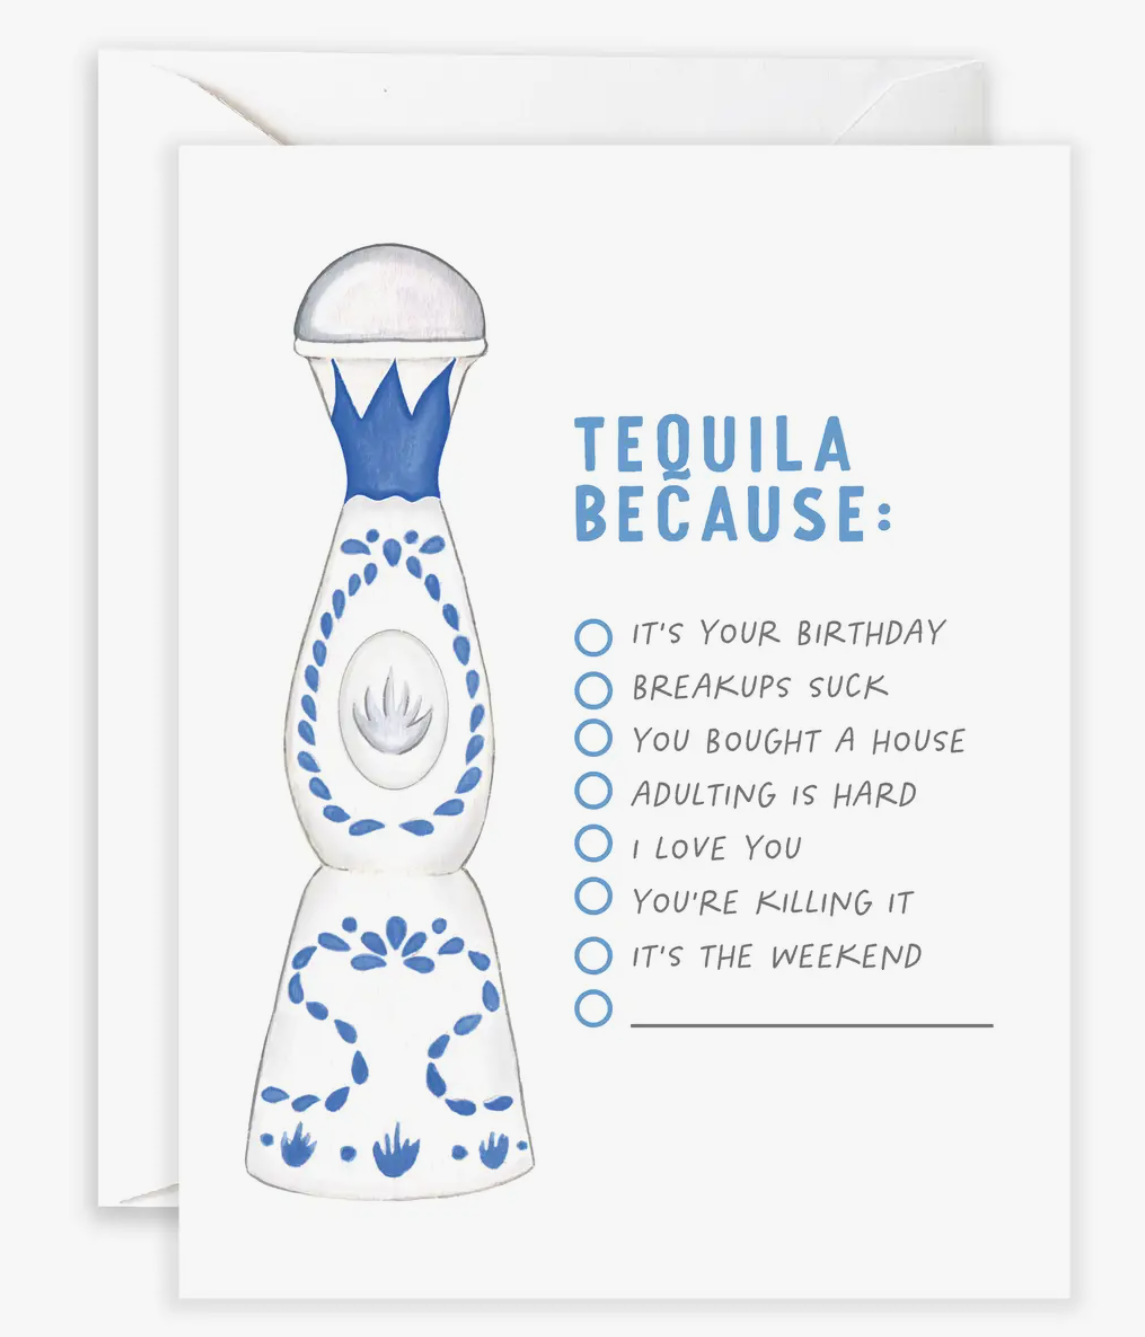 Tequila Because Card